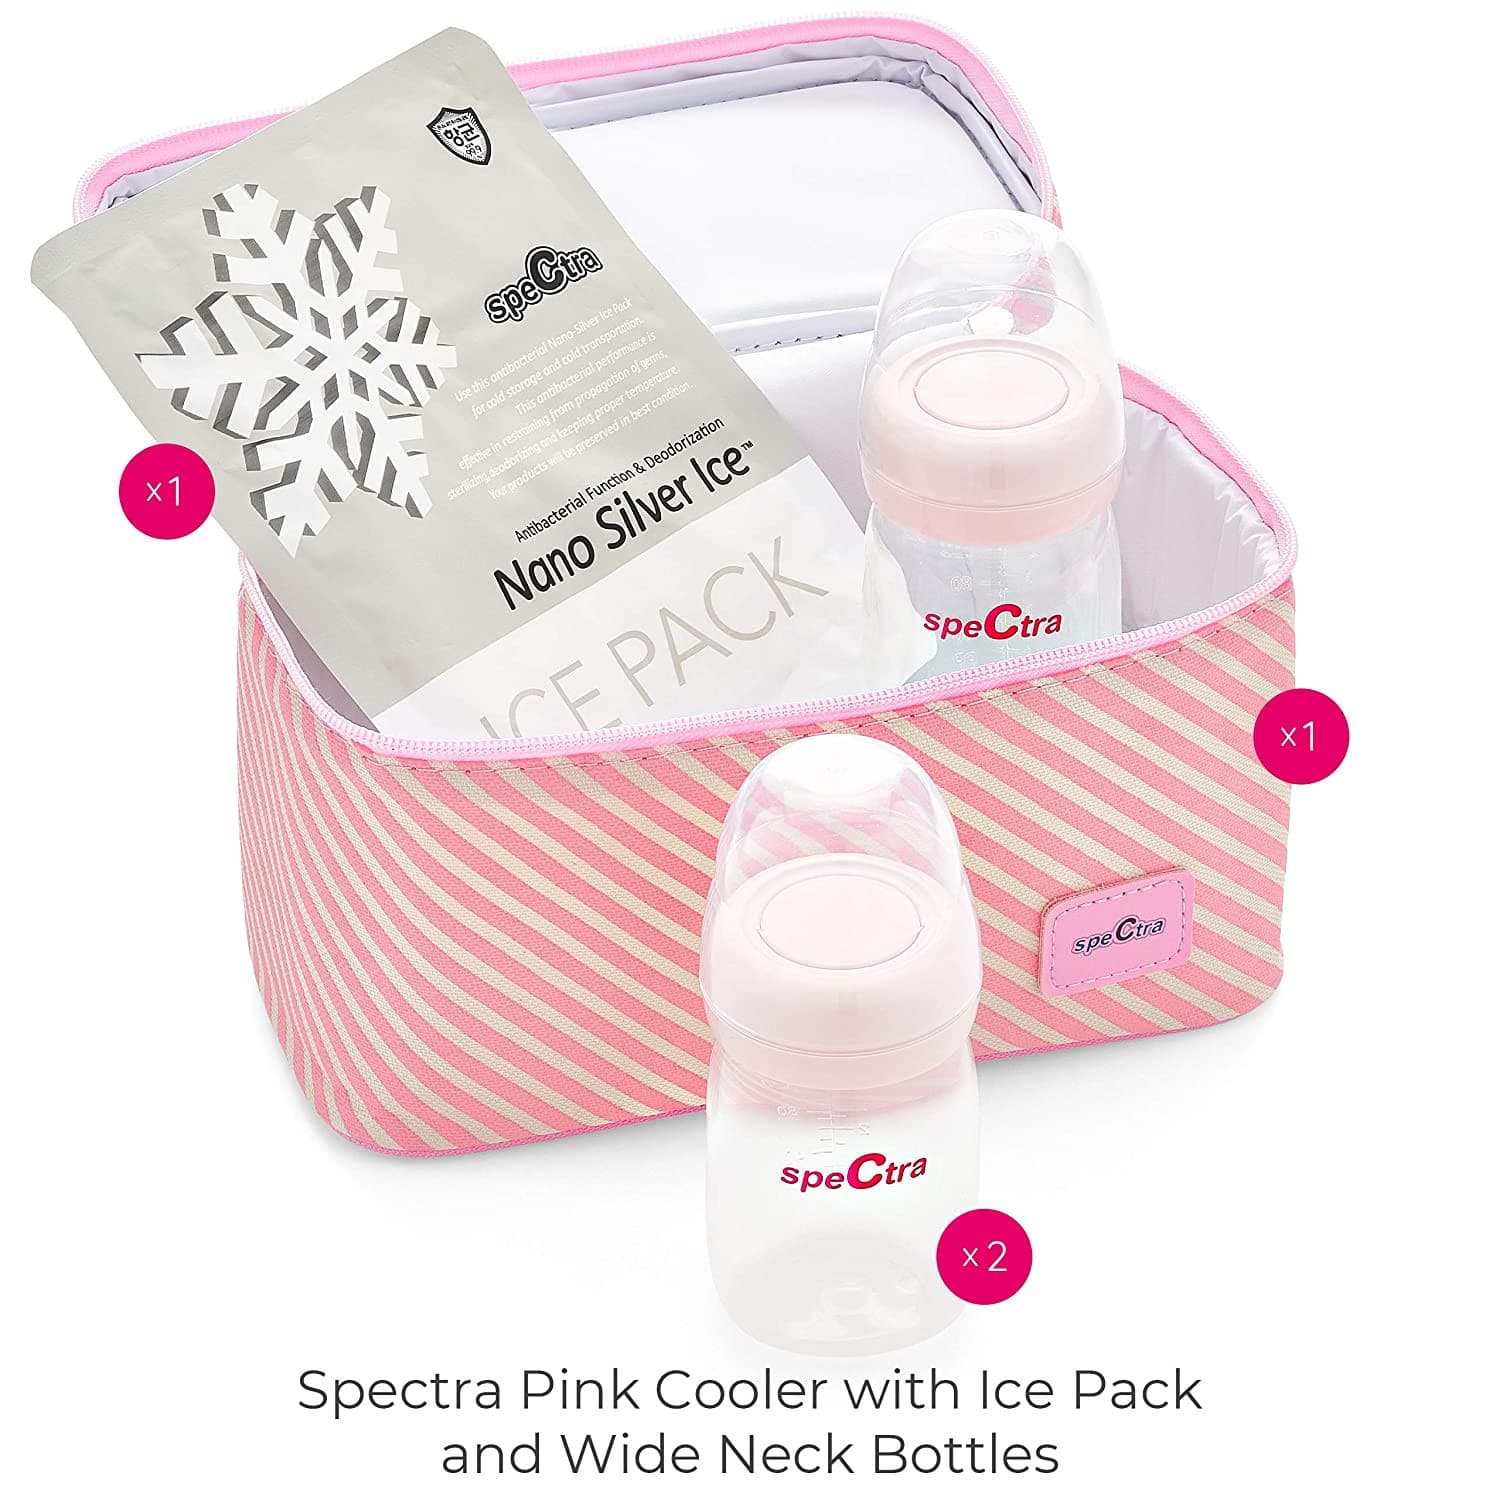 Spectra Cooler Kit with 2 Bottles and Ice Pack.